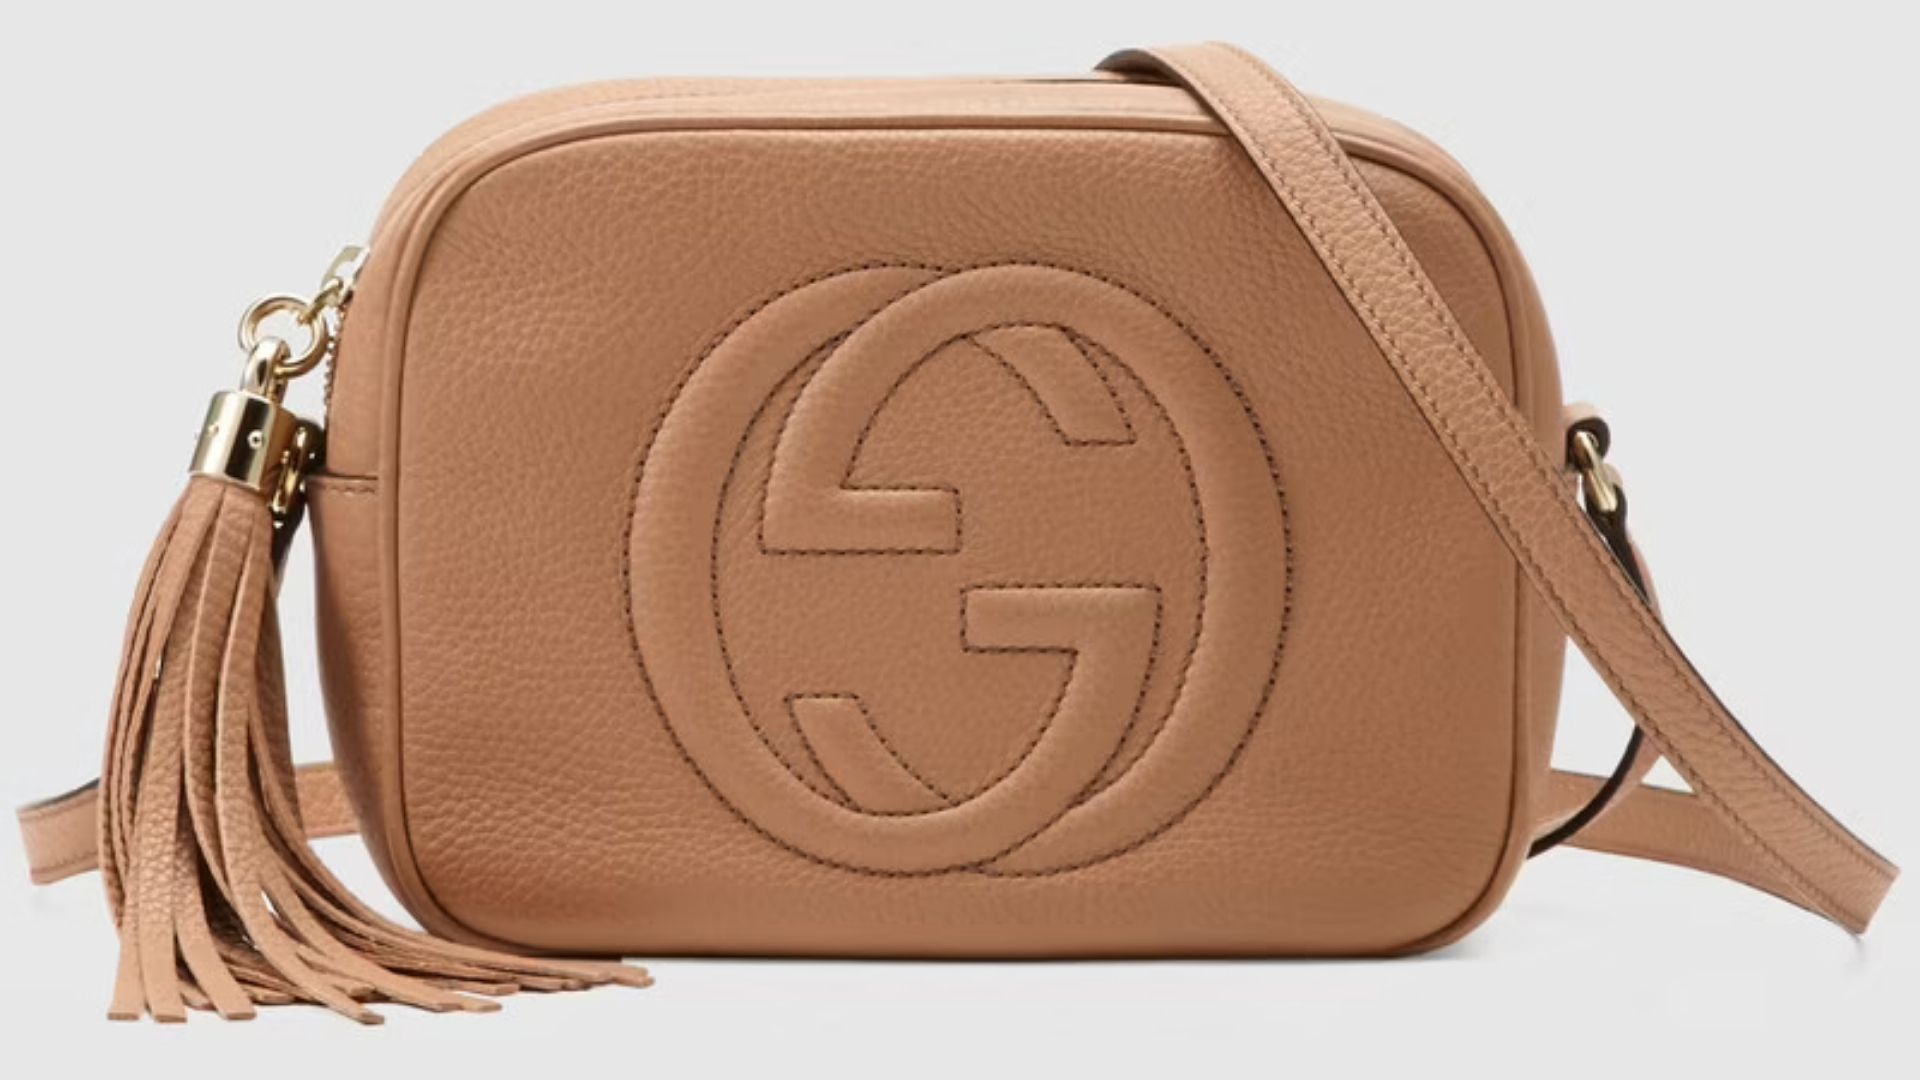 10 of the most iconic Gucci bags to add to your collection